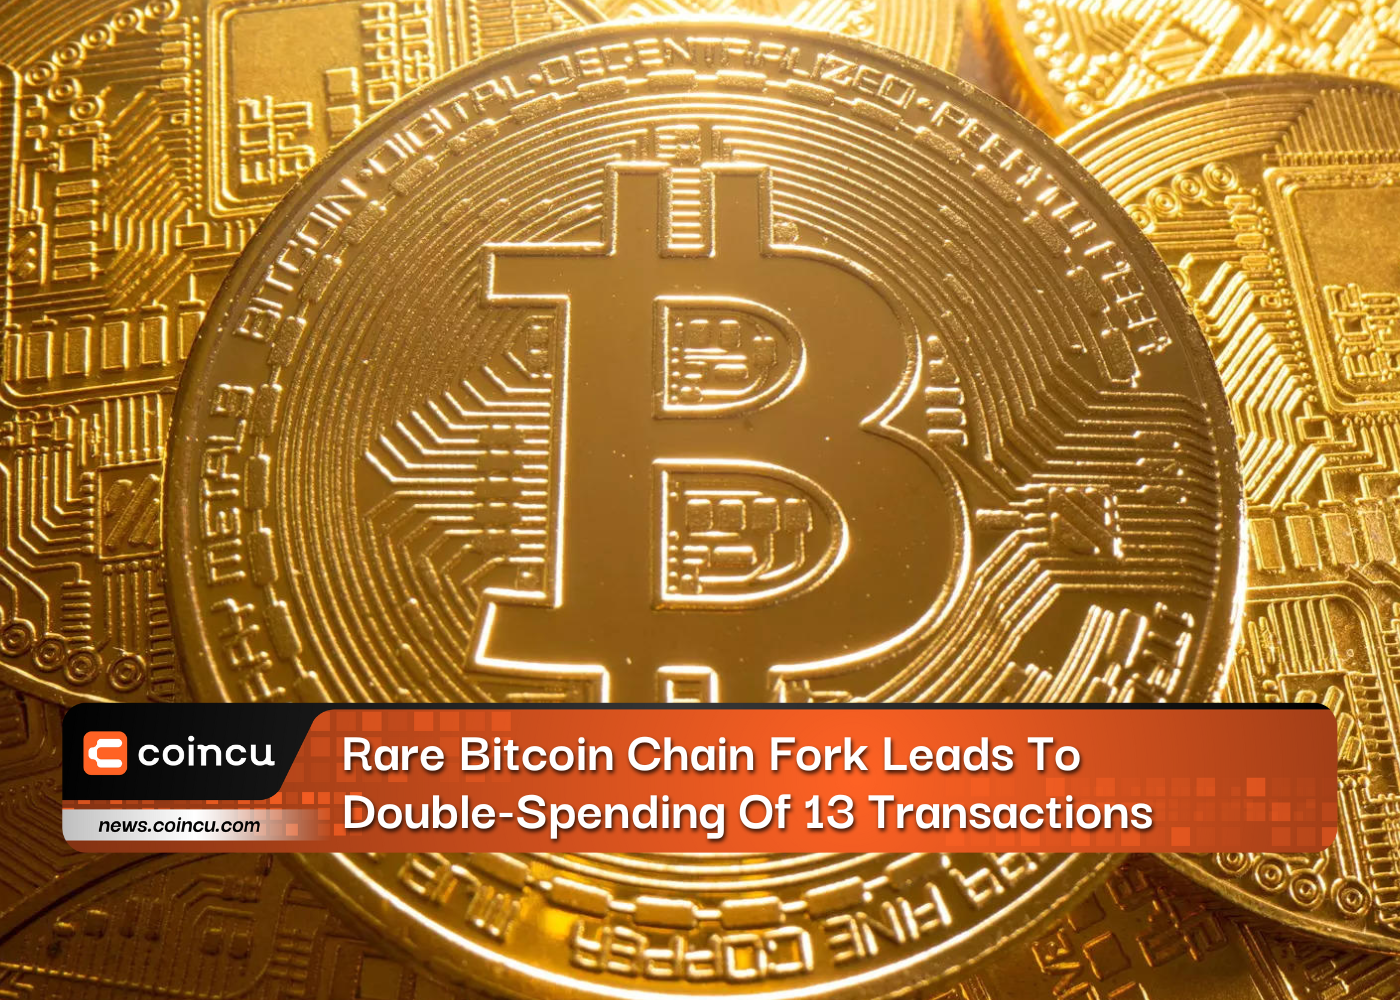 Rare Bitcoin Chain Fork Leads To Double-Spending Of 13 Transactions